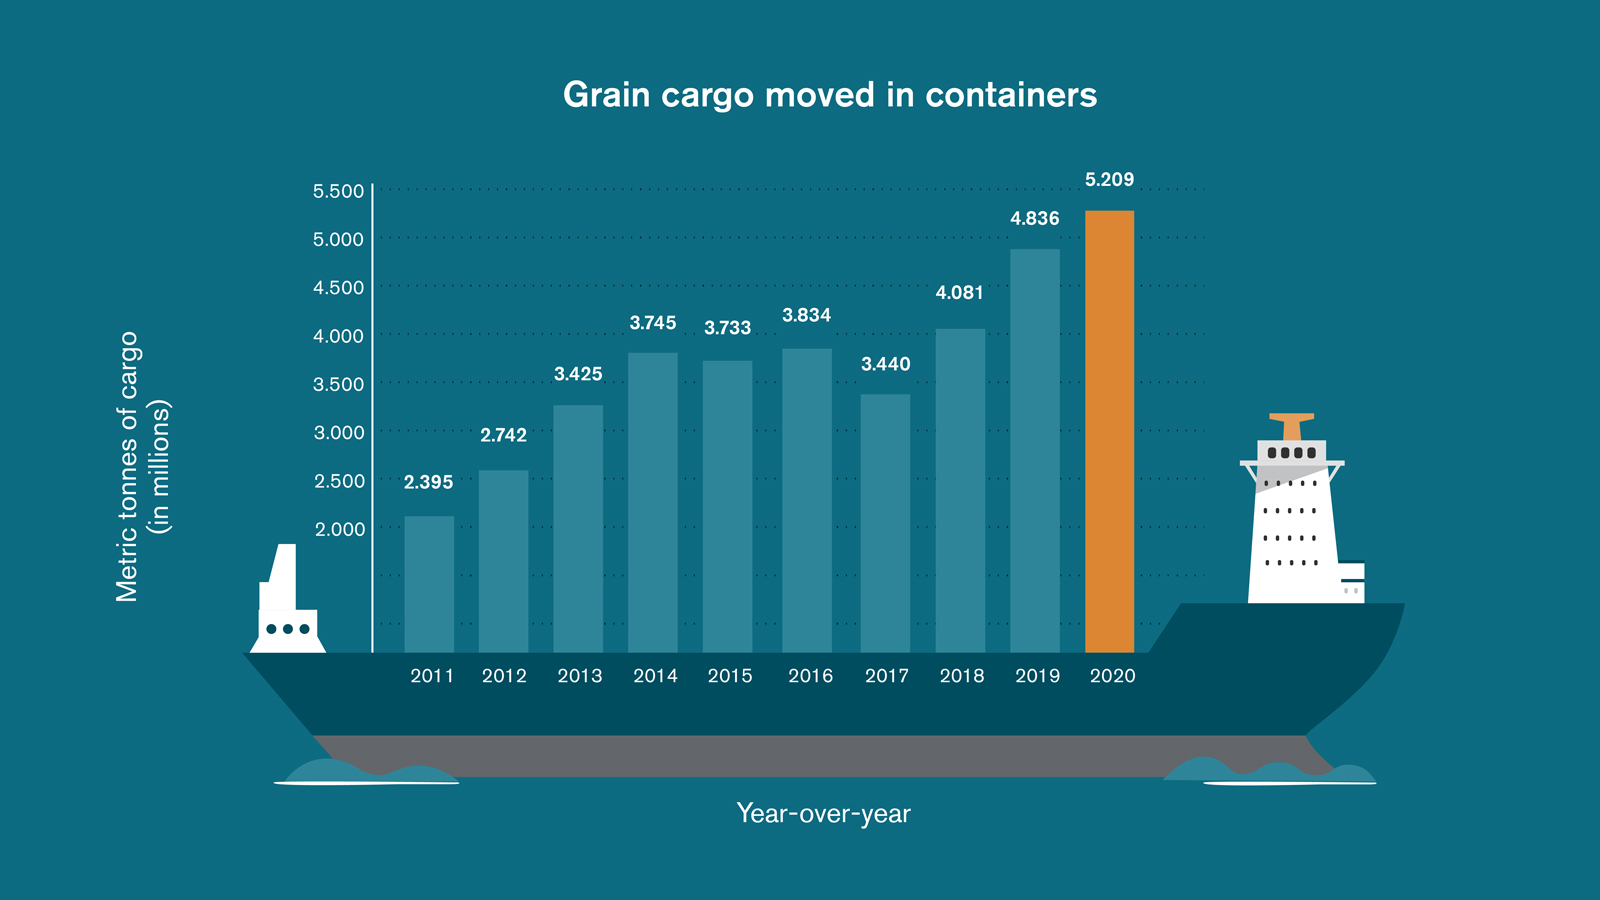 Grain cargo moved in containers